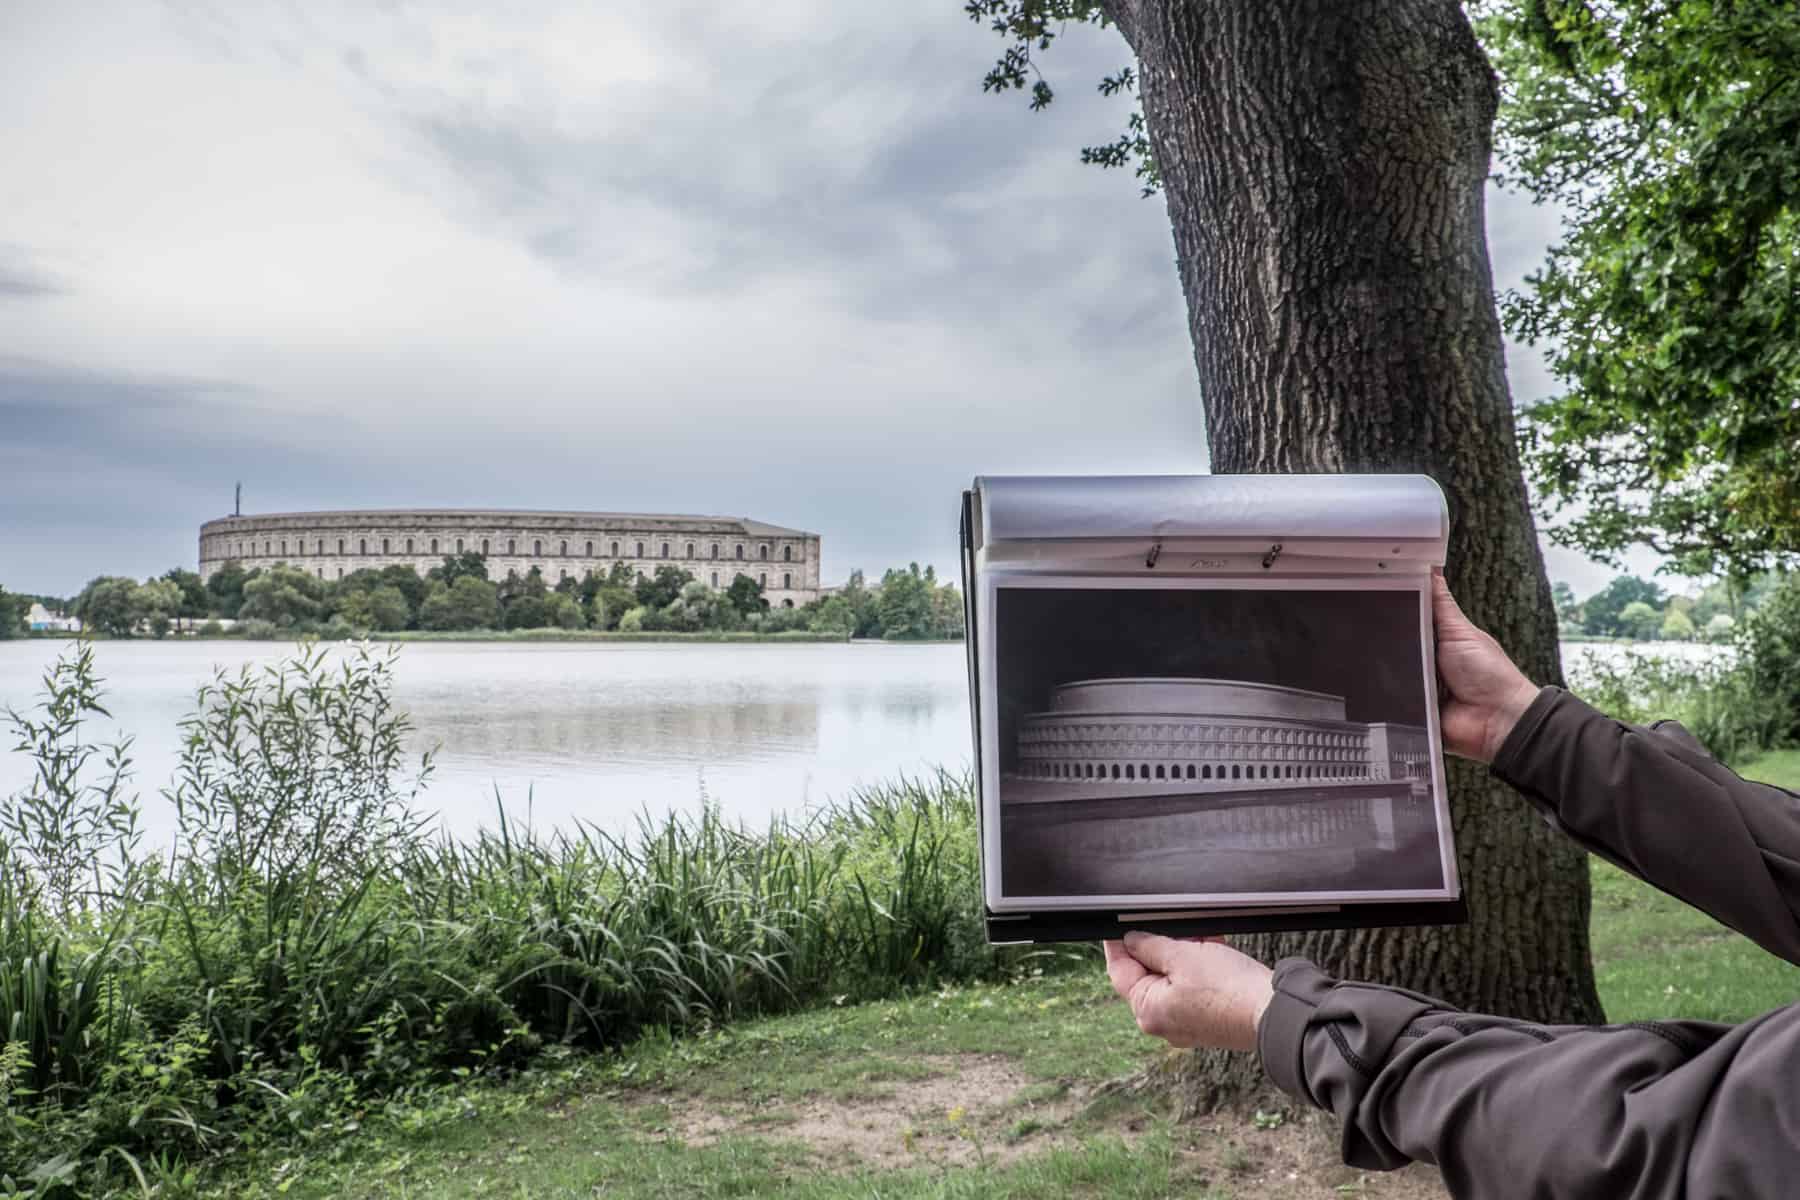 A female guide holds a picture of the finished Colosseum-like design of the Congress Hall Nazi Party Rally Ground site, in front of the unfinished construction in the background